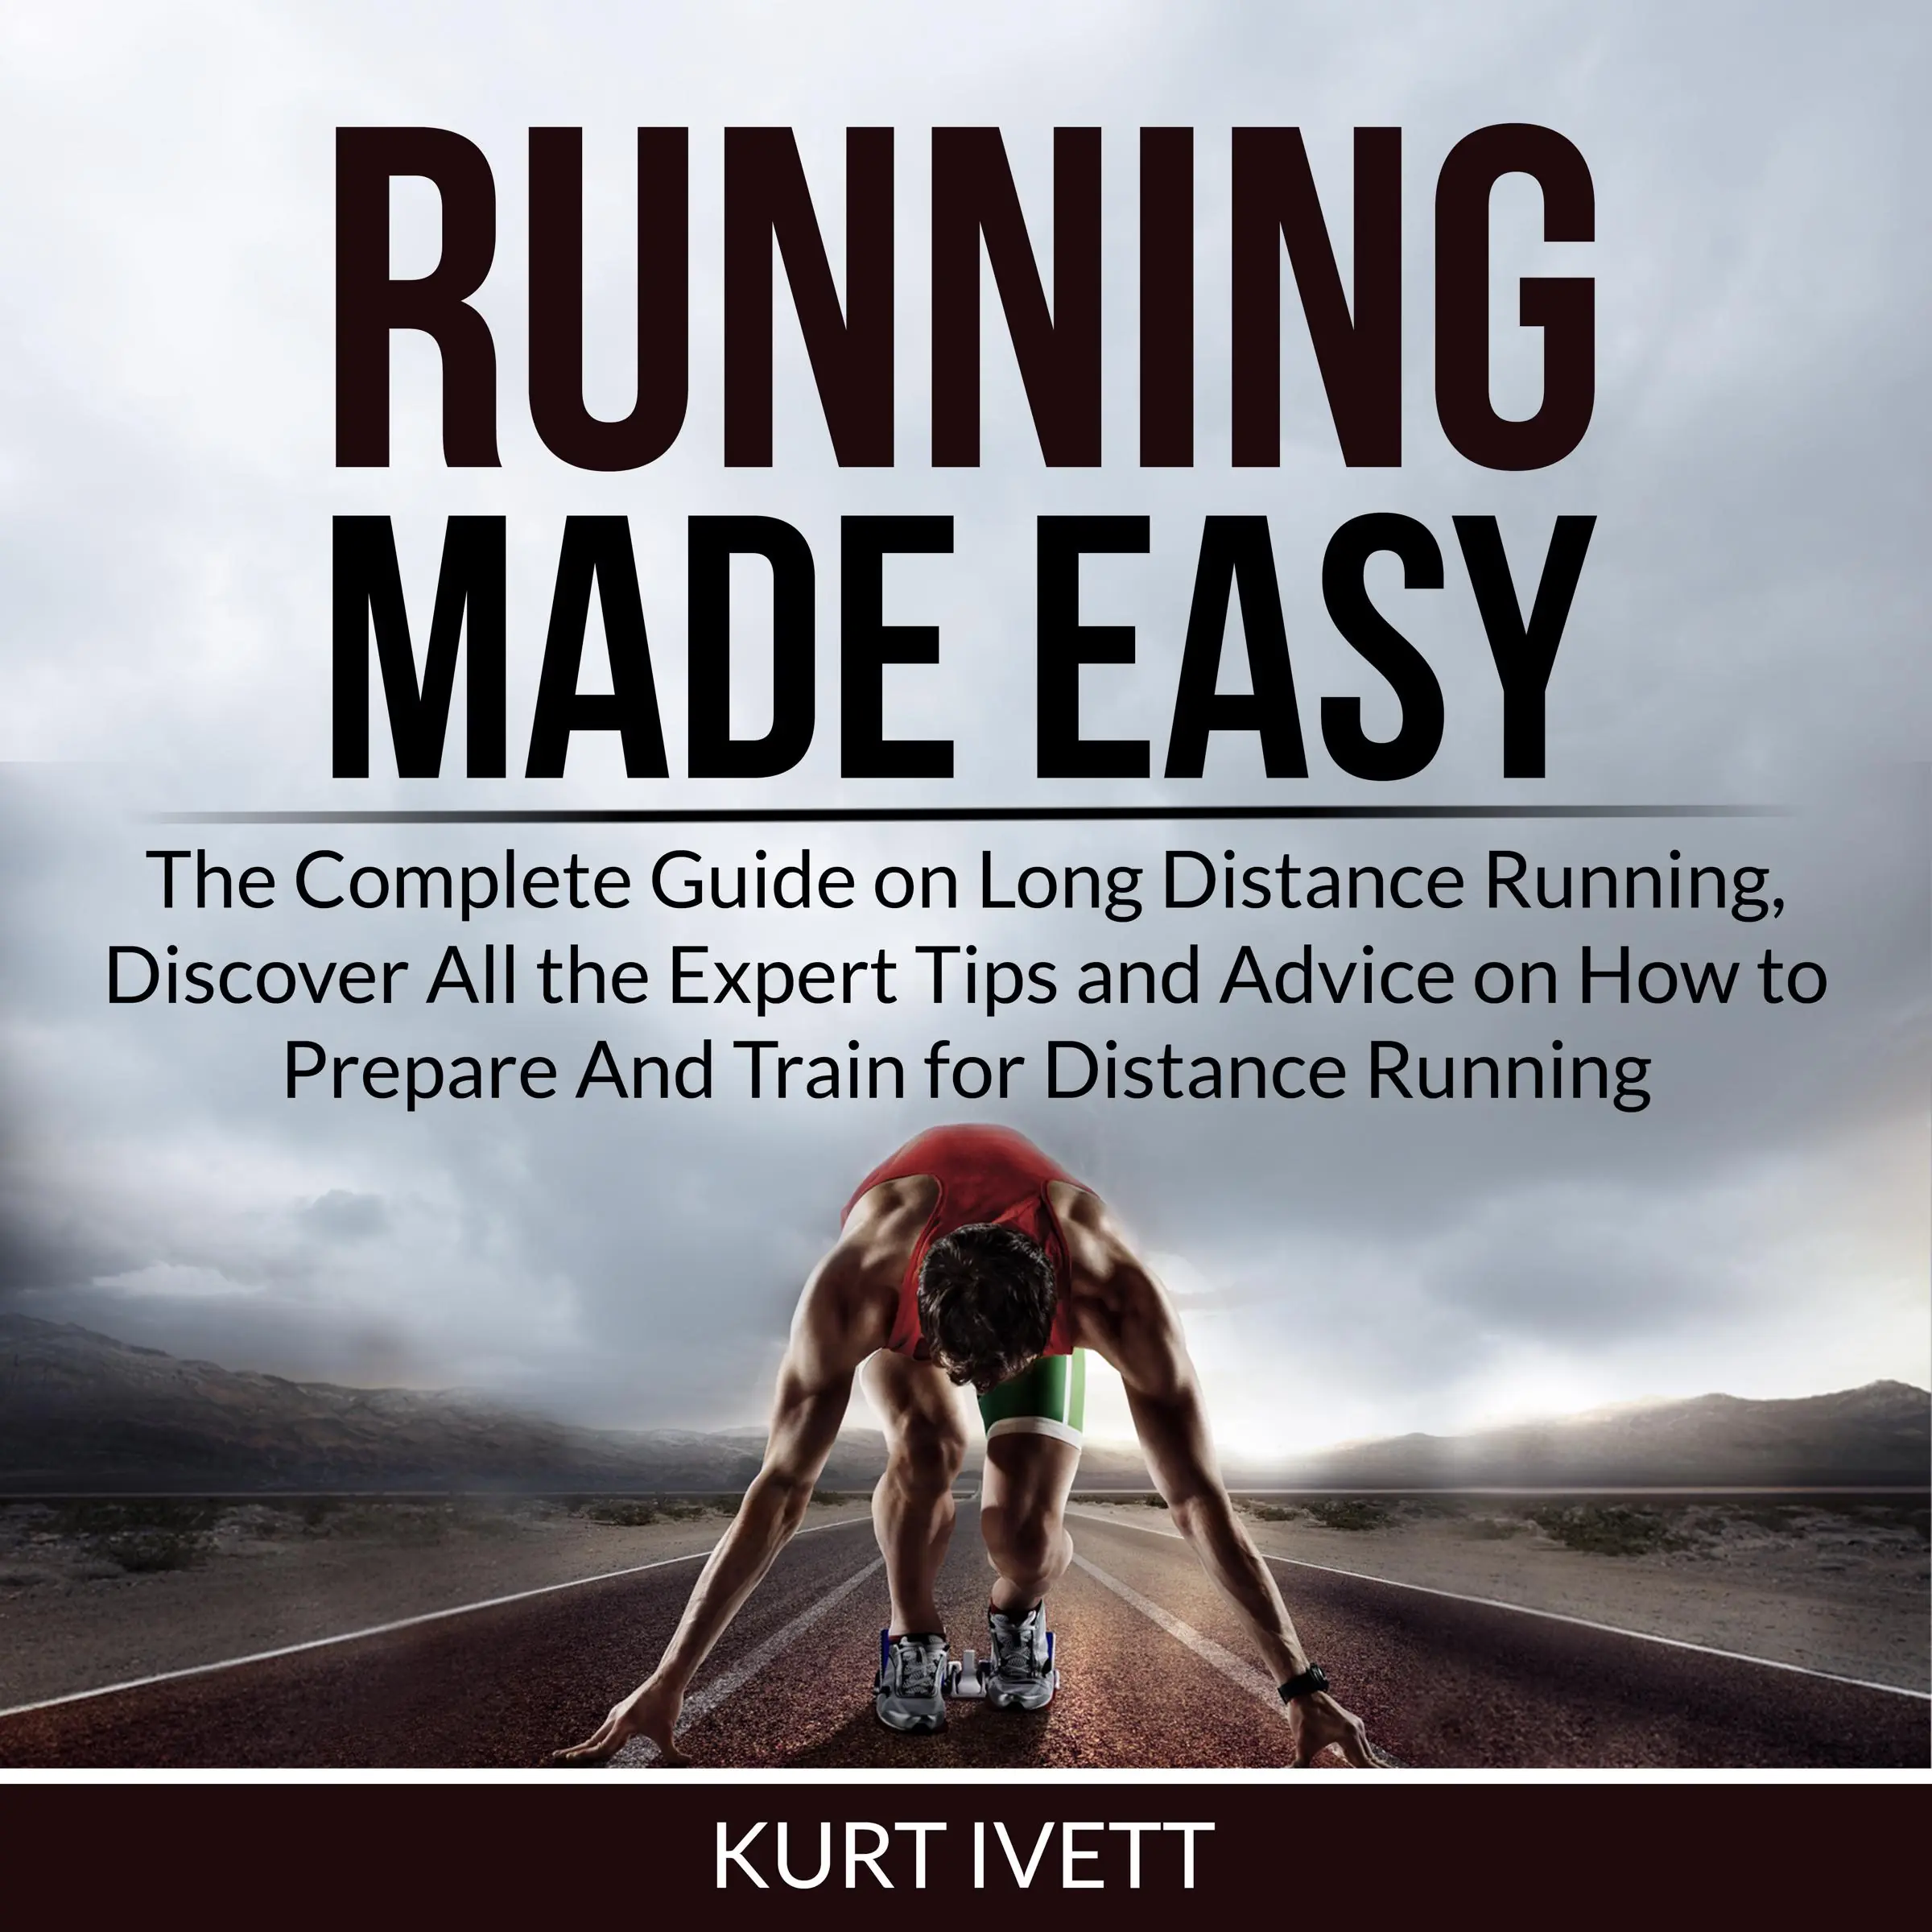 Running Made Easy: The Complete Guide on Long Distance Running, Discover All the Expert Tips and Advice on How to Prepare And Train for Distance Running by Kurt Ivett Audiobook